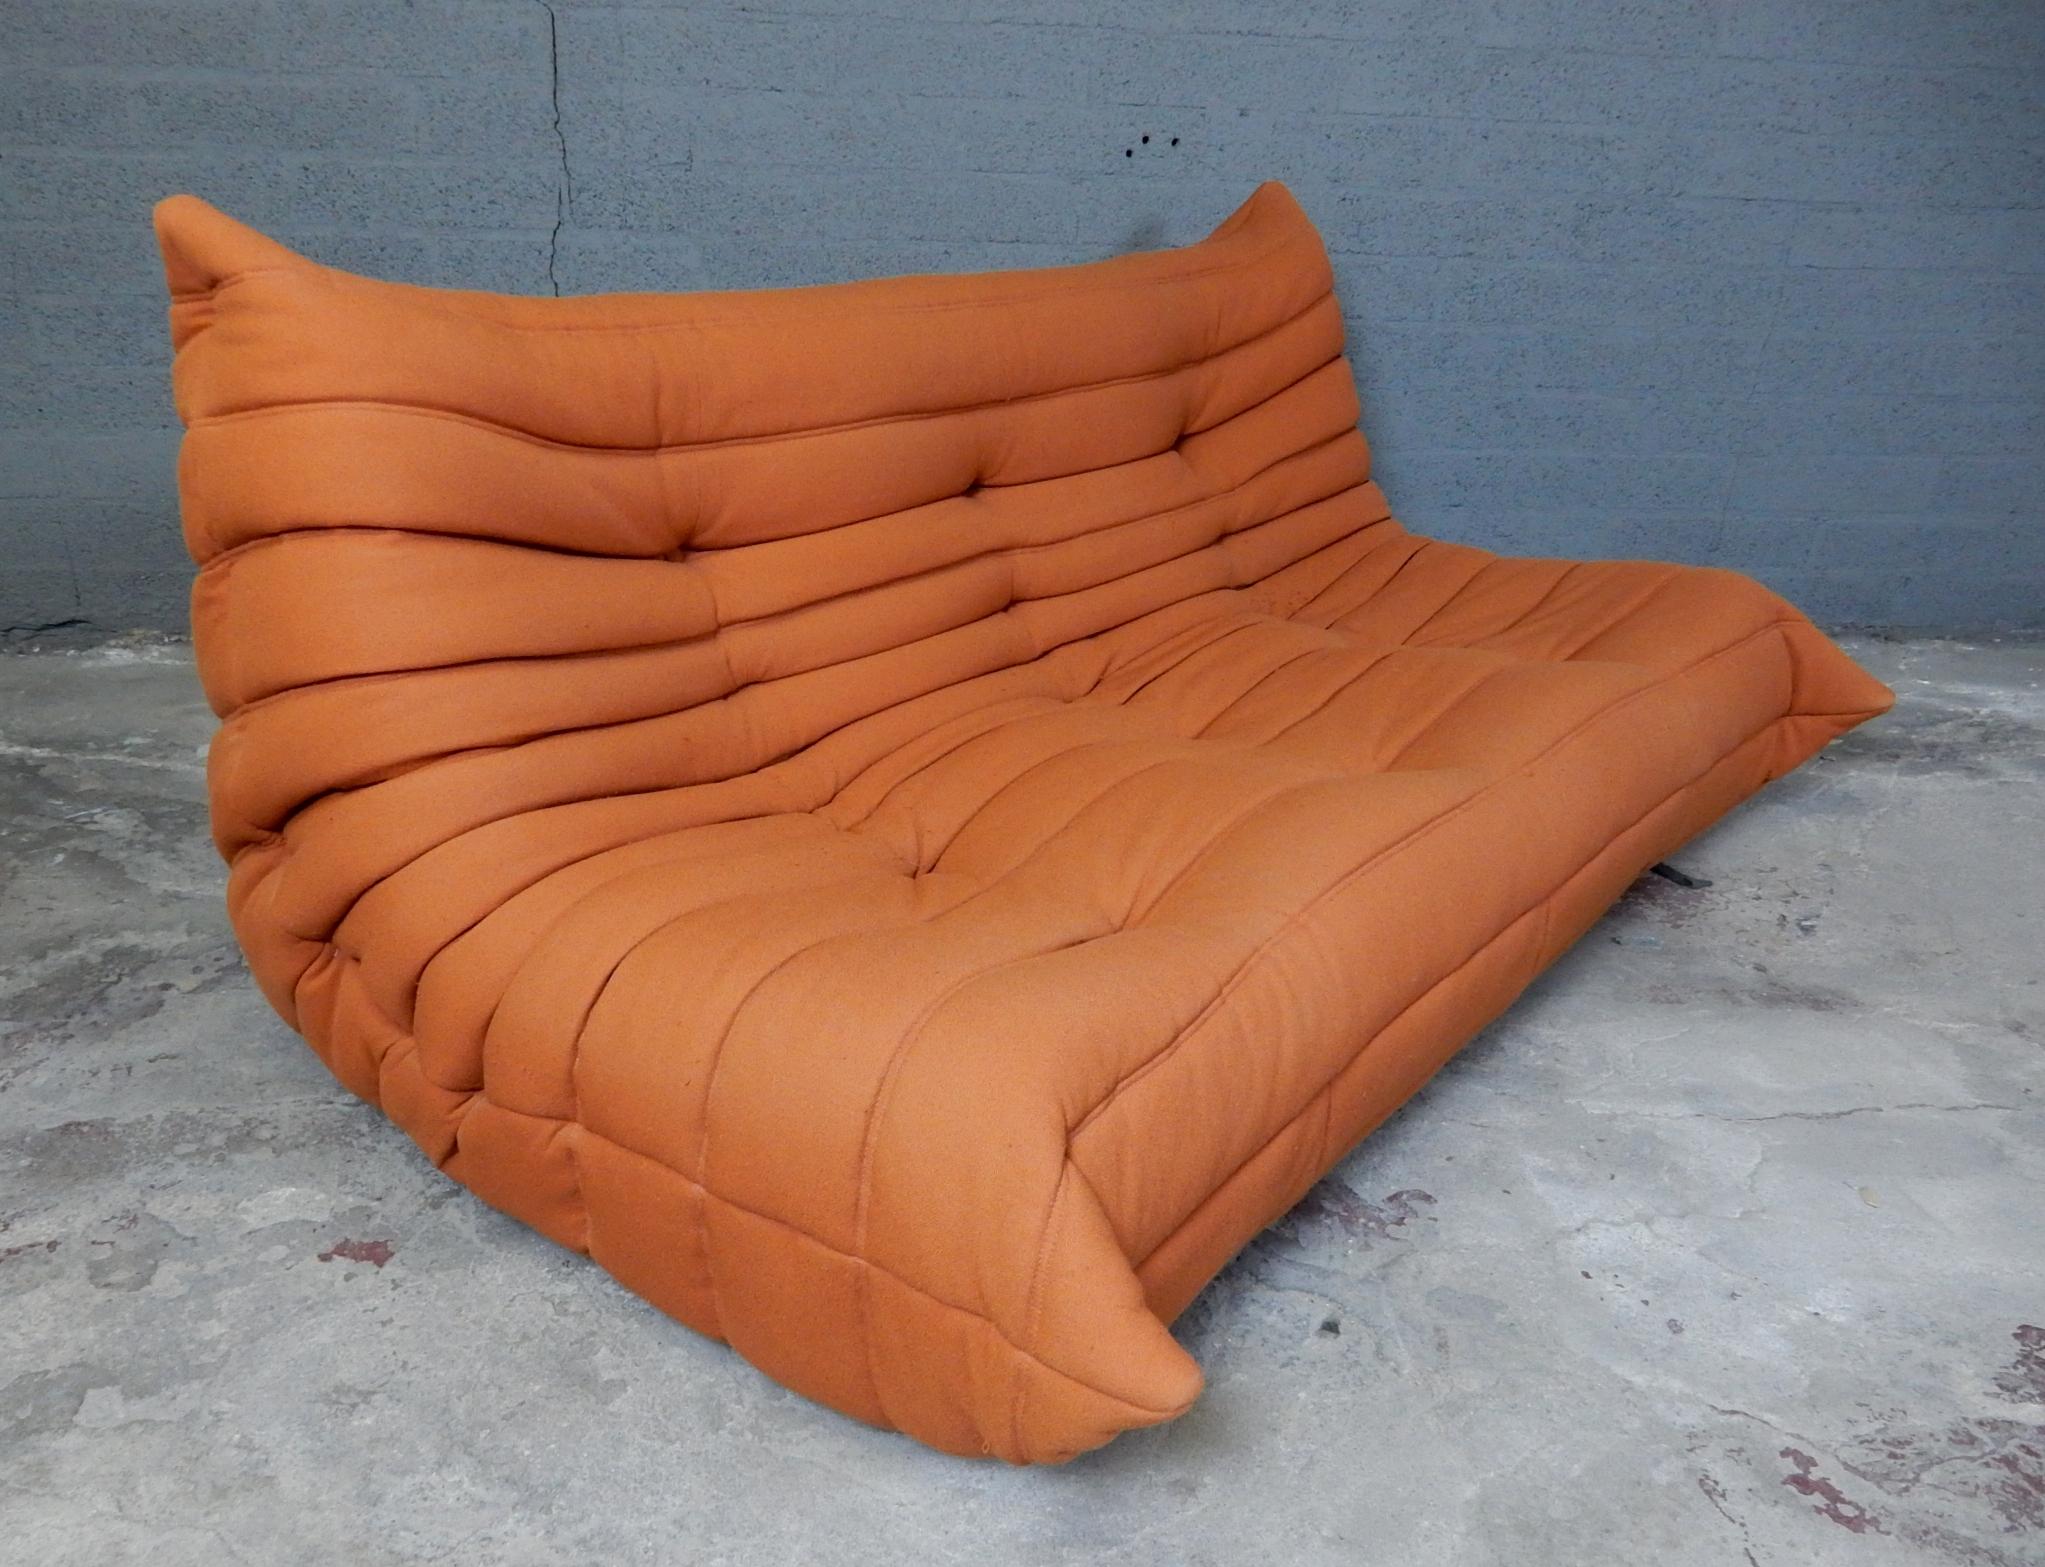 1980s Ligne Roset Togo sofa set in its original rare soft orange fabric.
Set consists of one three-seat, one two-seat, one corner seat and one floating ottoman.
Ultra comfortable!